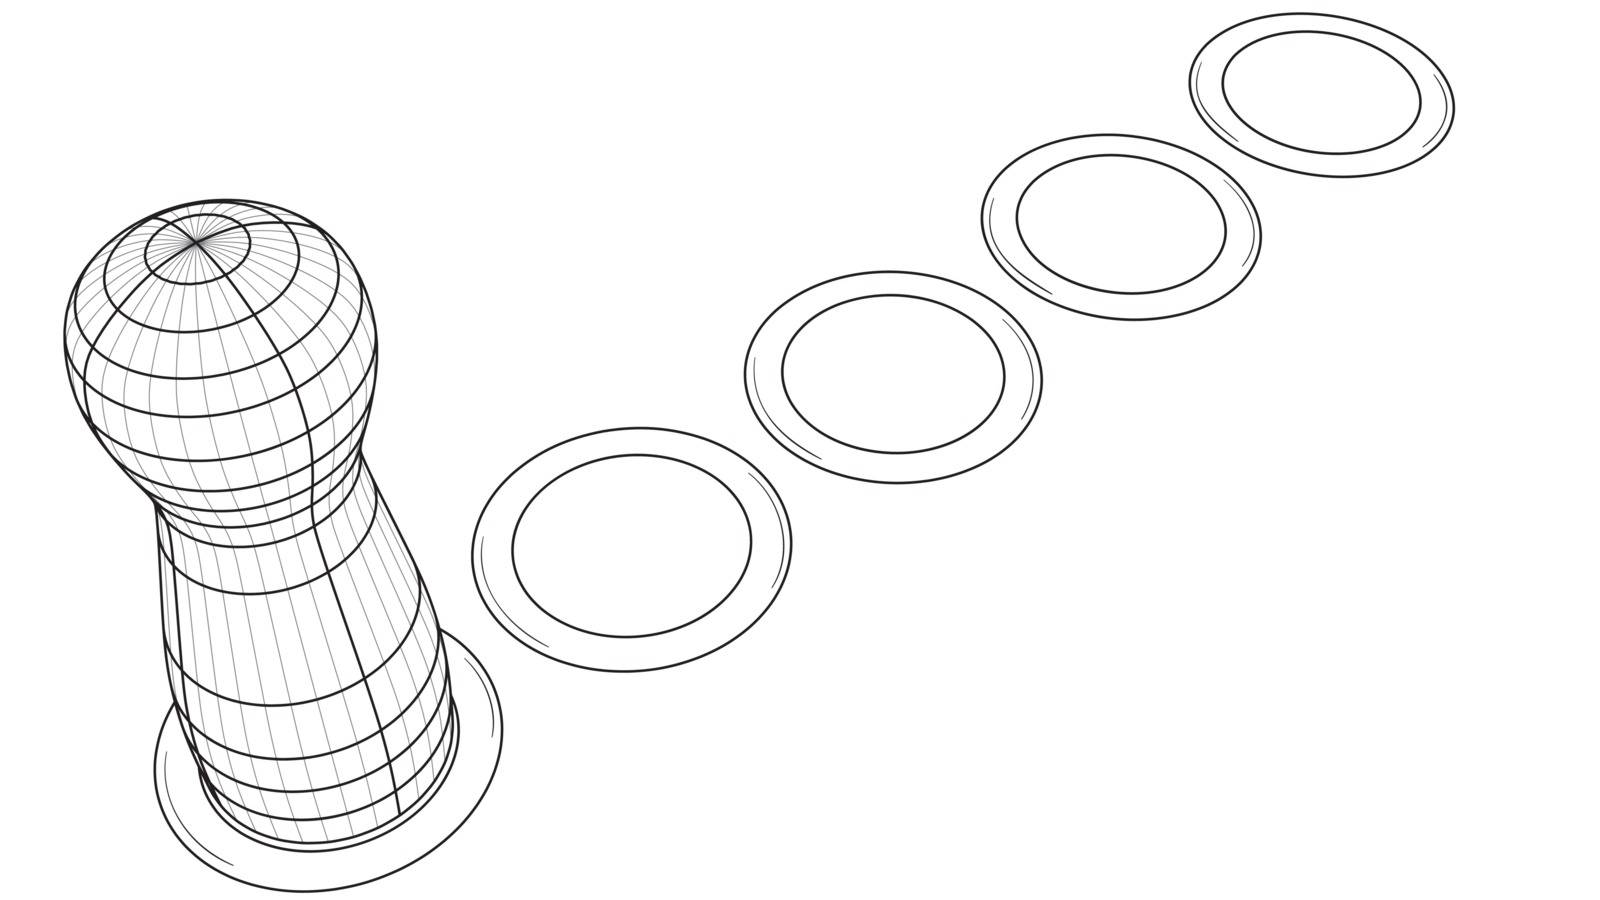 Game figure on board with path of dots. Black outline illustration on white background. Sketch.